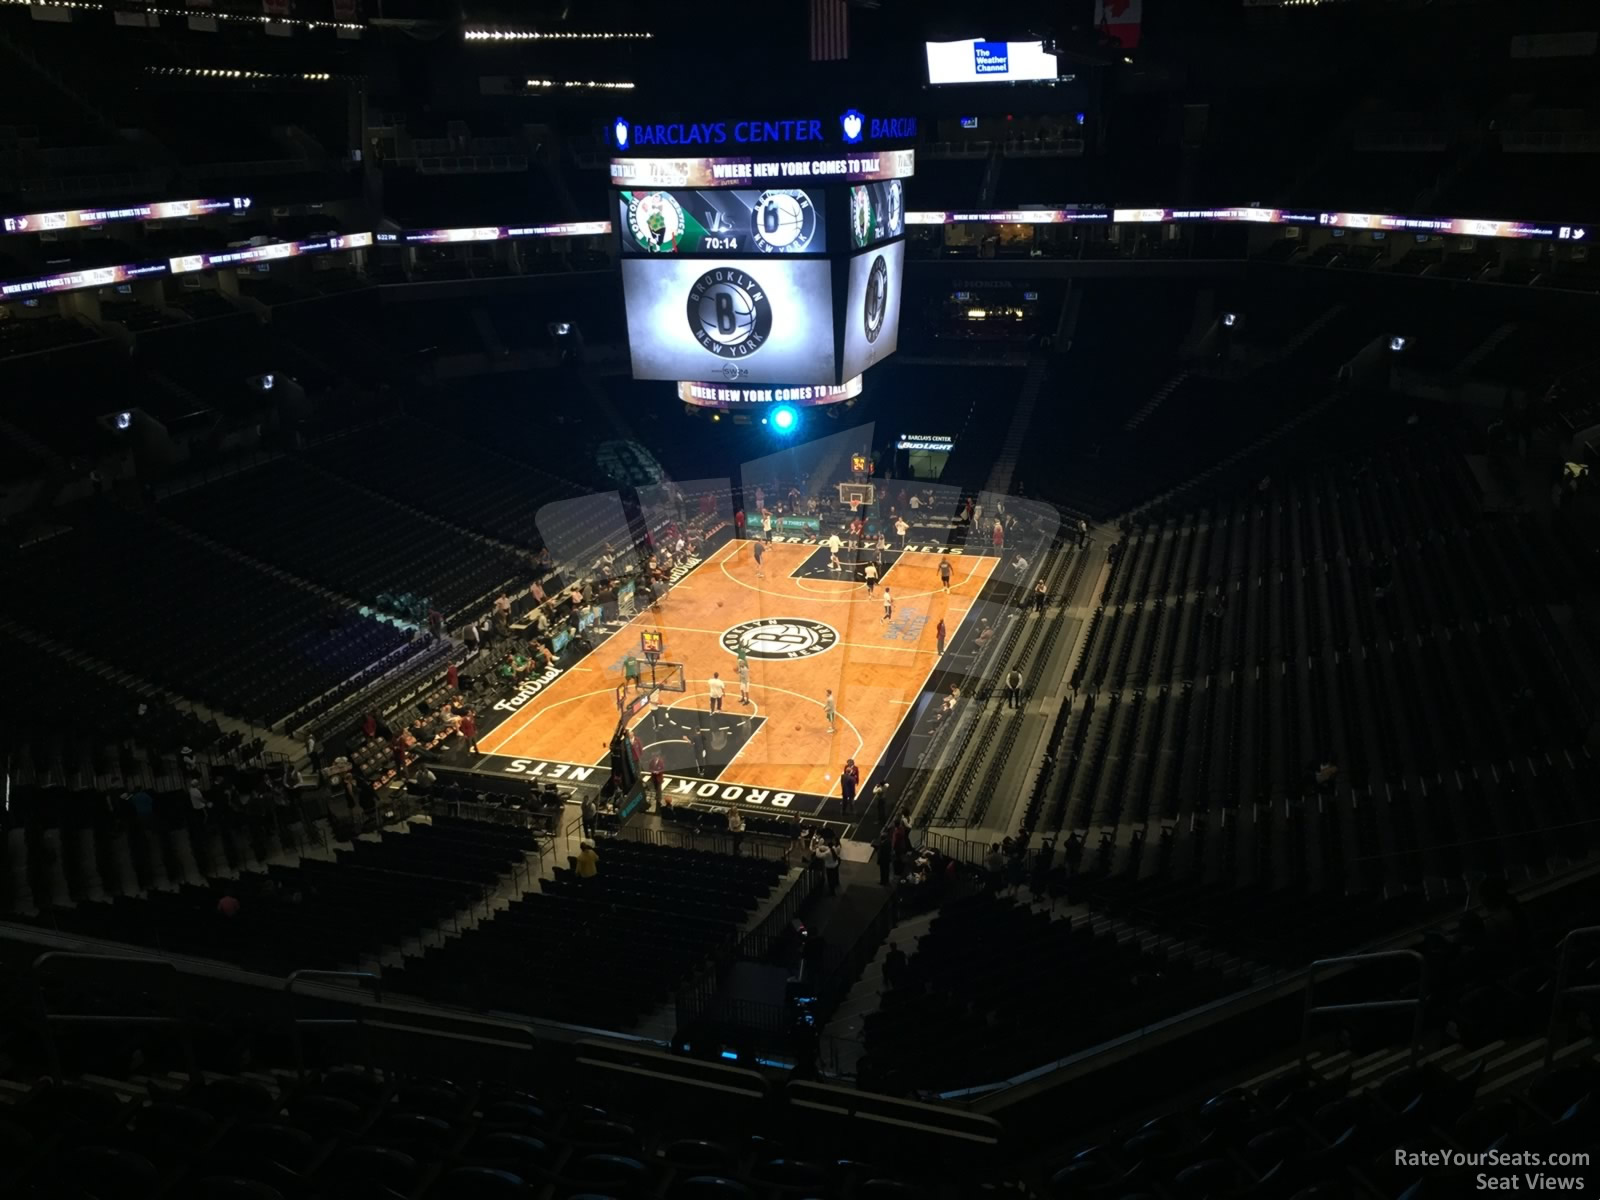 section 230, row 10 seat view  for basketball - barclays center